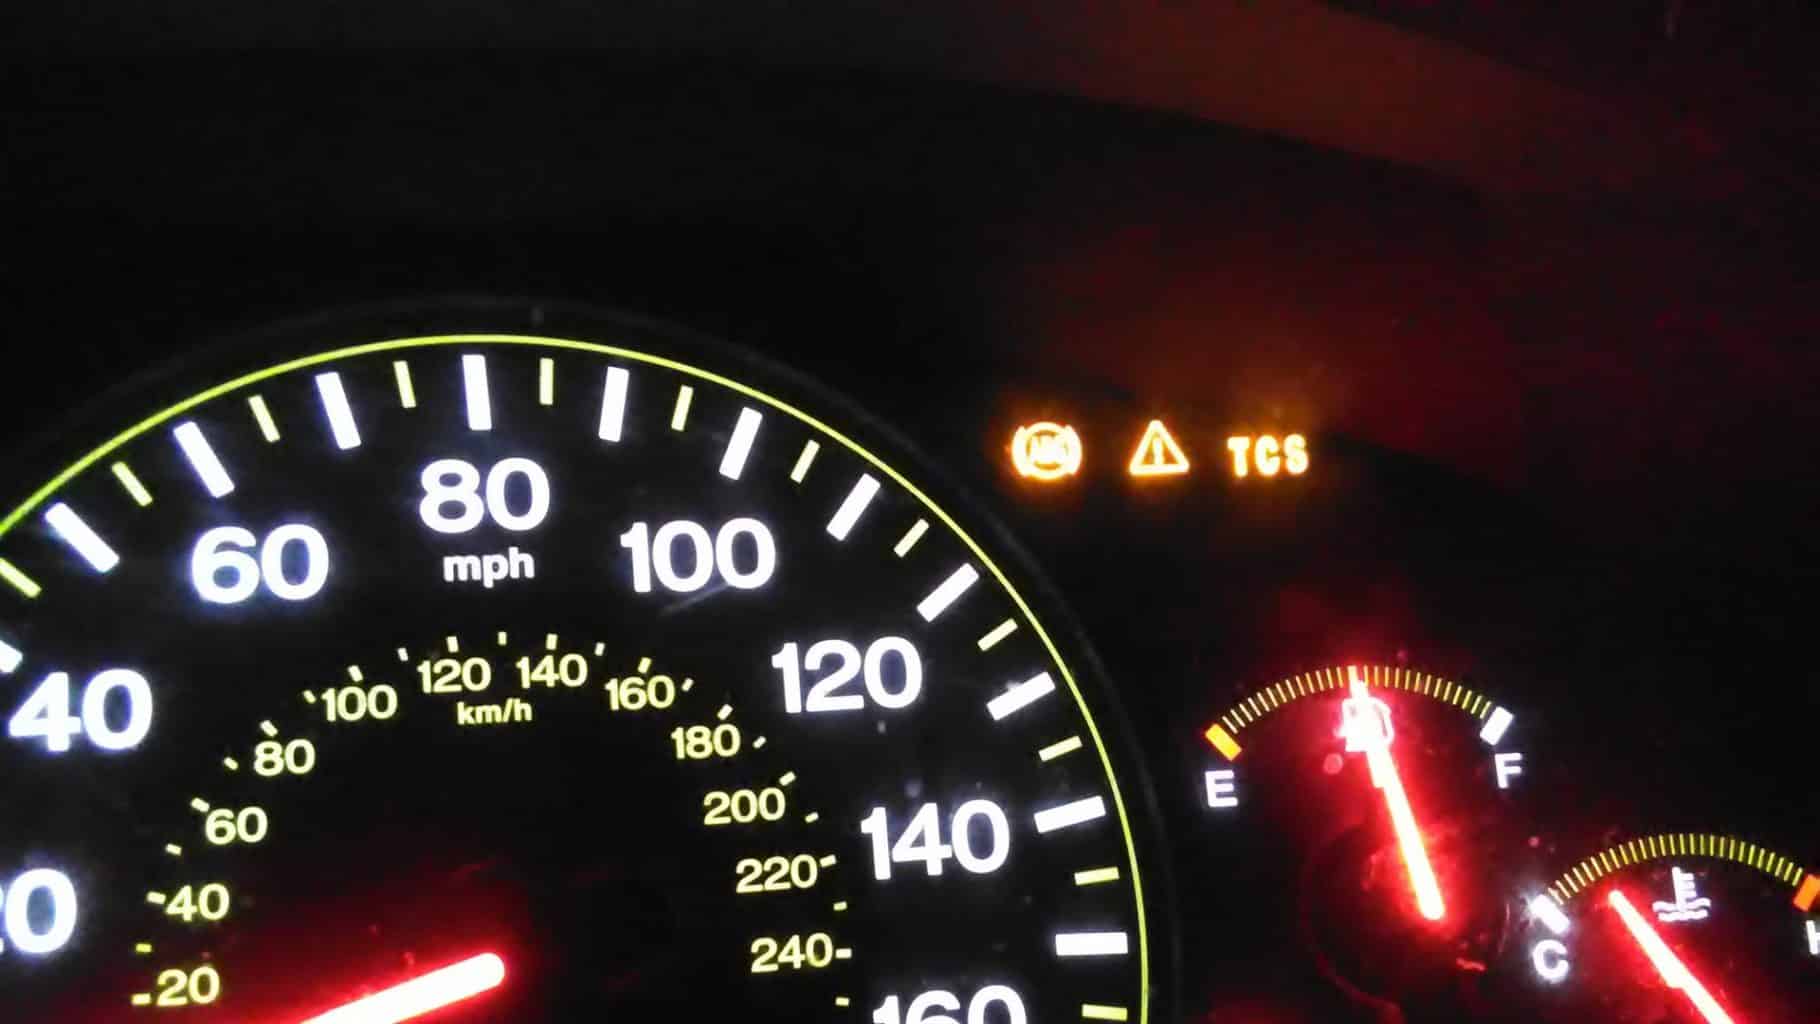 How To Turn Off ABS Light